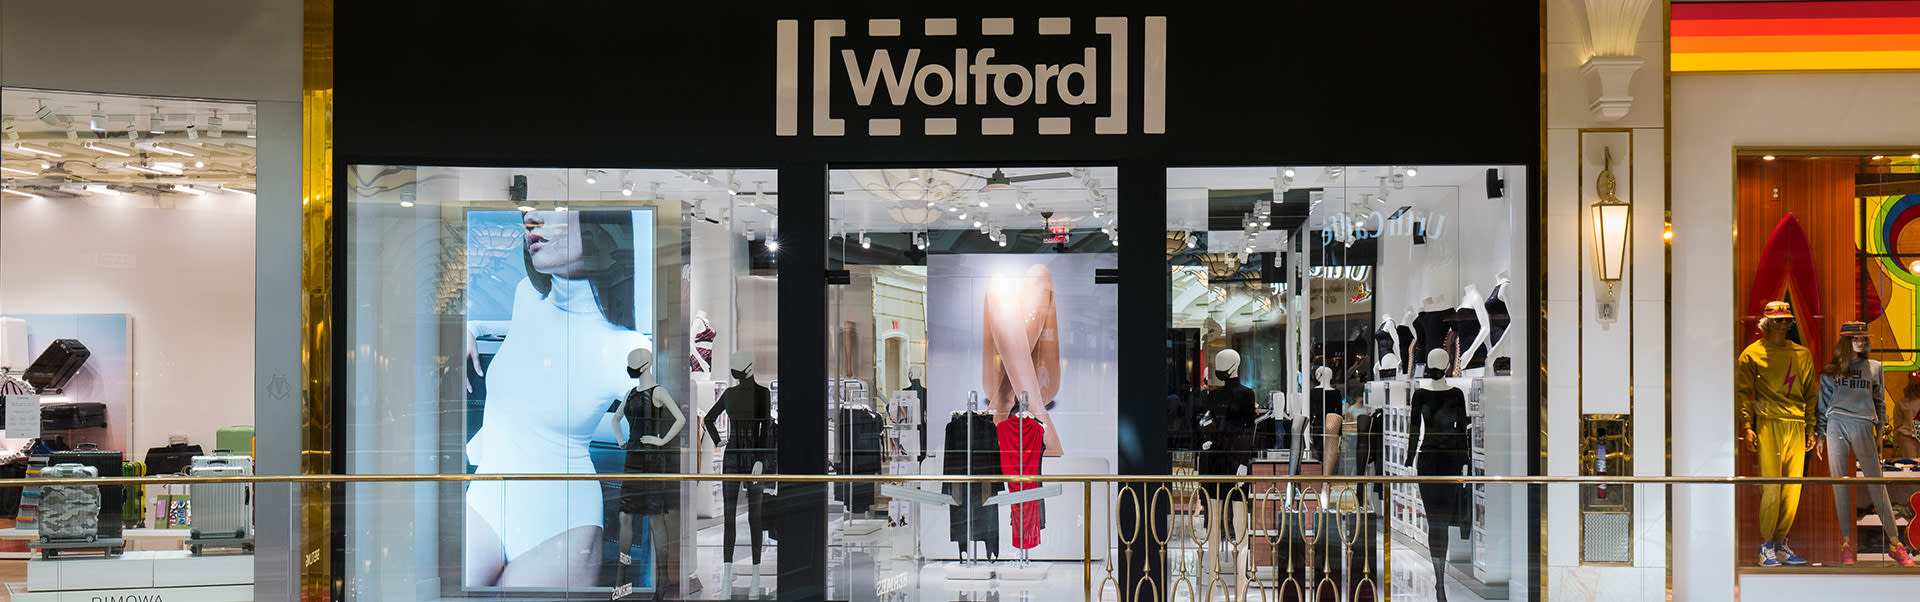 The luxury brand Wolford is available again to visitors of the Spice  shopping centre